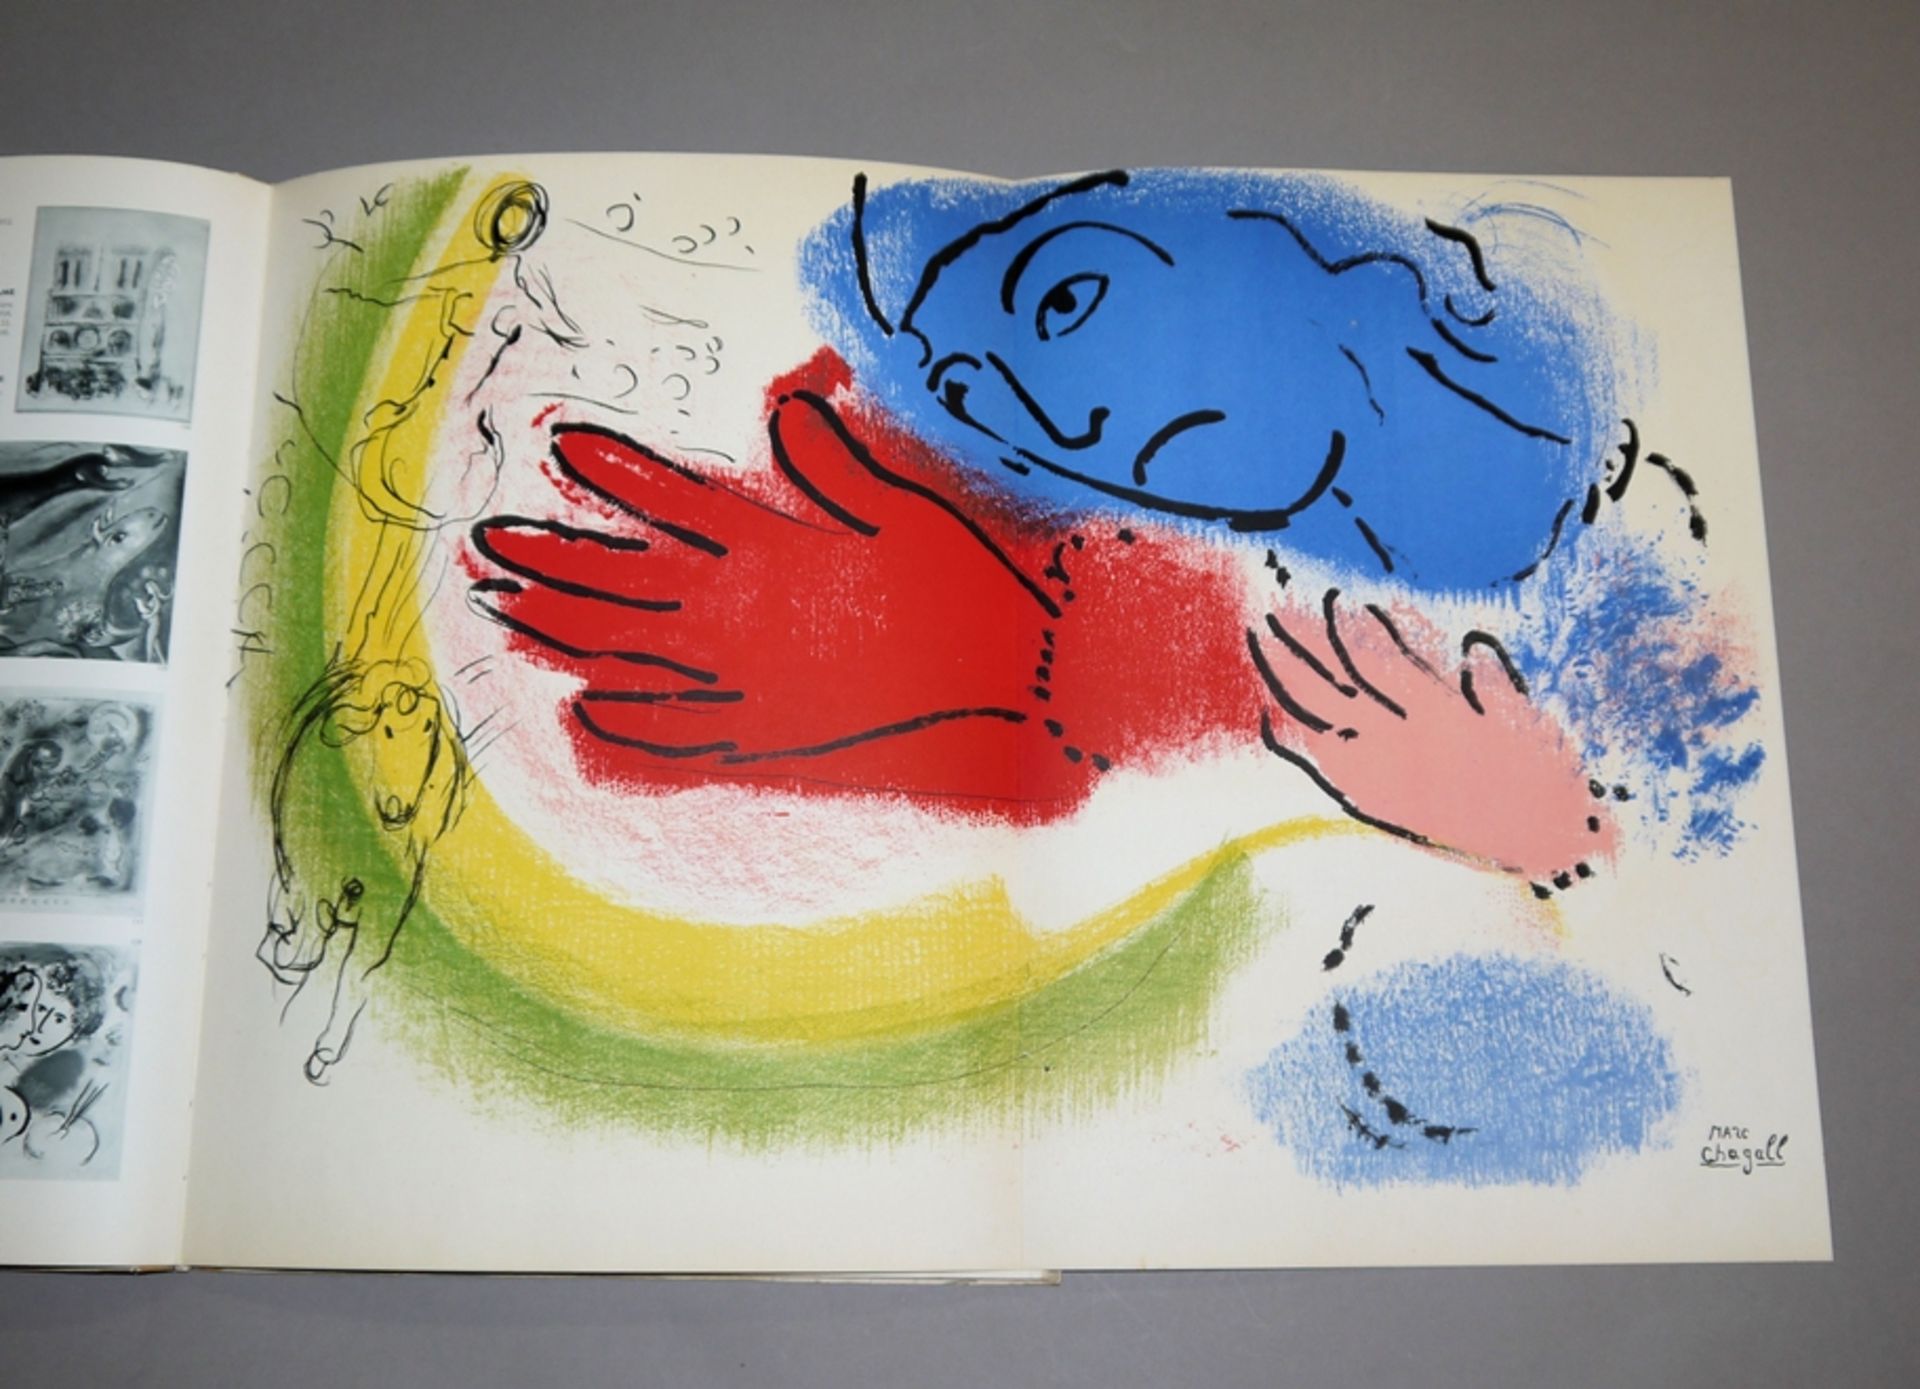 Derrière le Miroir, 10 Ans d'Edition 1946-56, Maeght Ed. with original prints by Chagall, Miró, Gia - Image 2 of 3